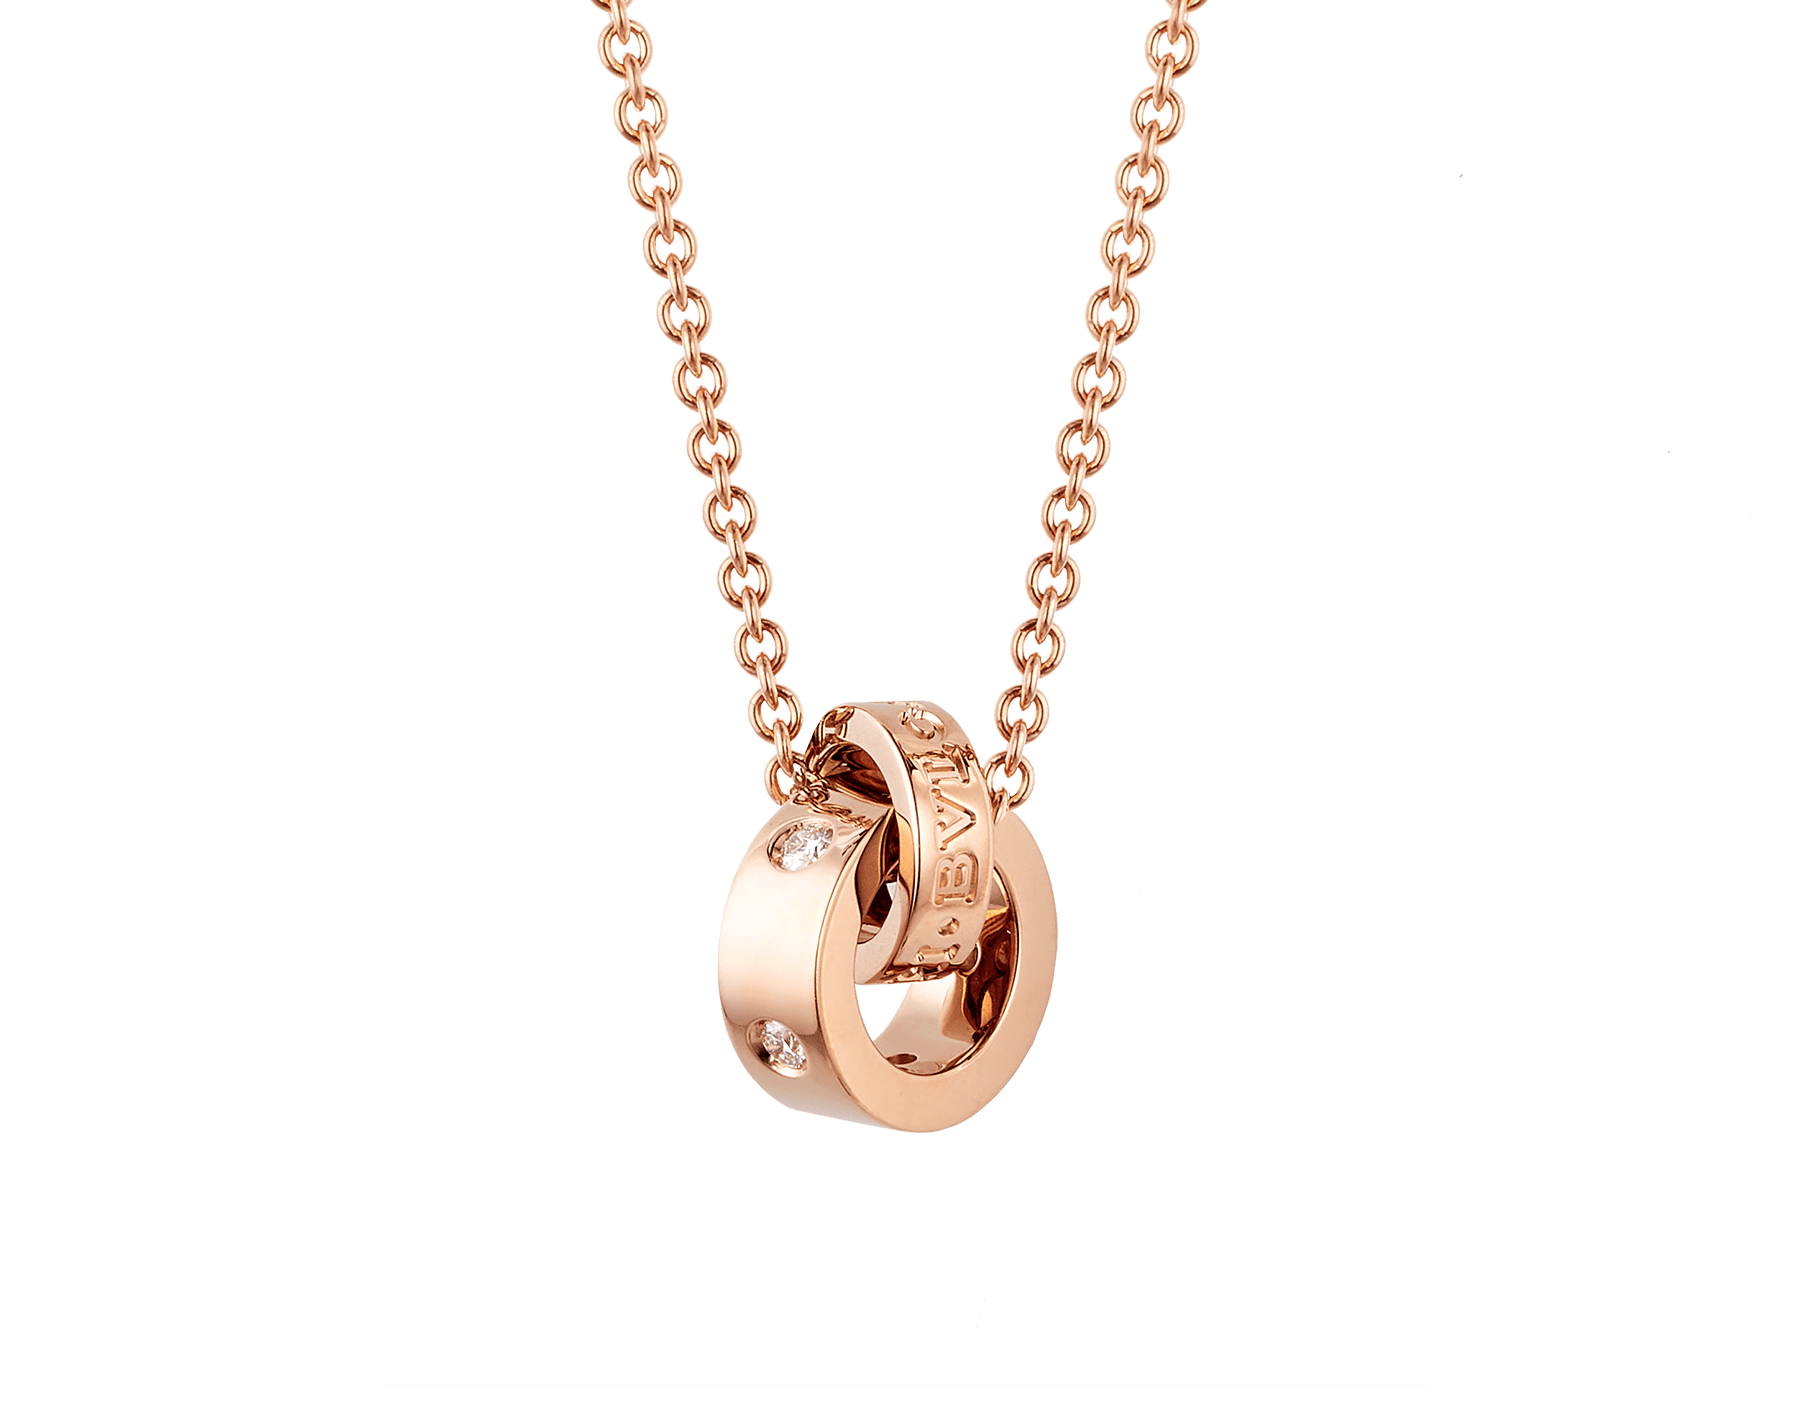 BVLGARI BVLGARI necklace with 18 kt rose gold chain and 18 kt rose gold pendant set with five diamonds 354028 image 1